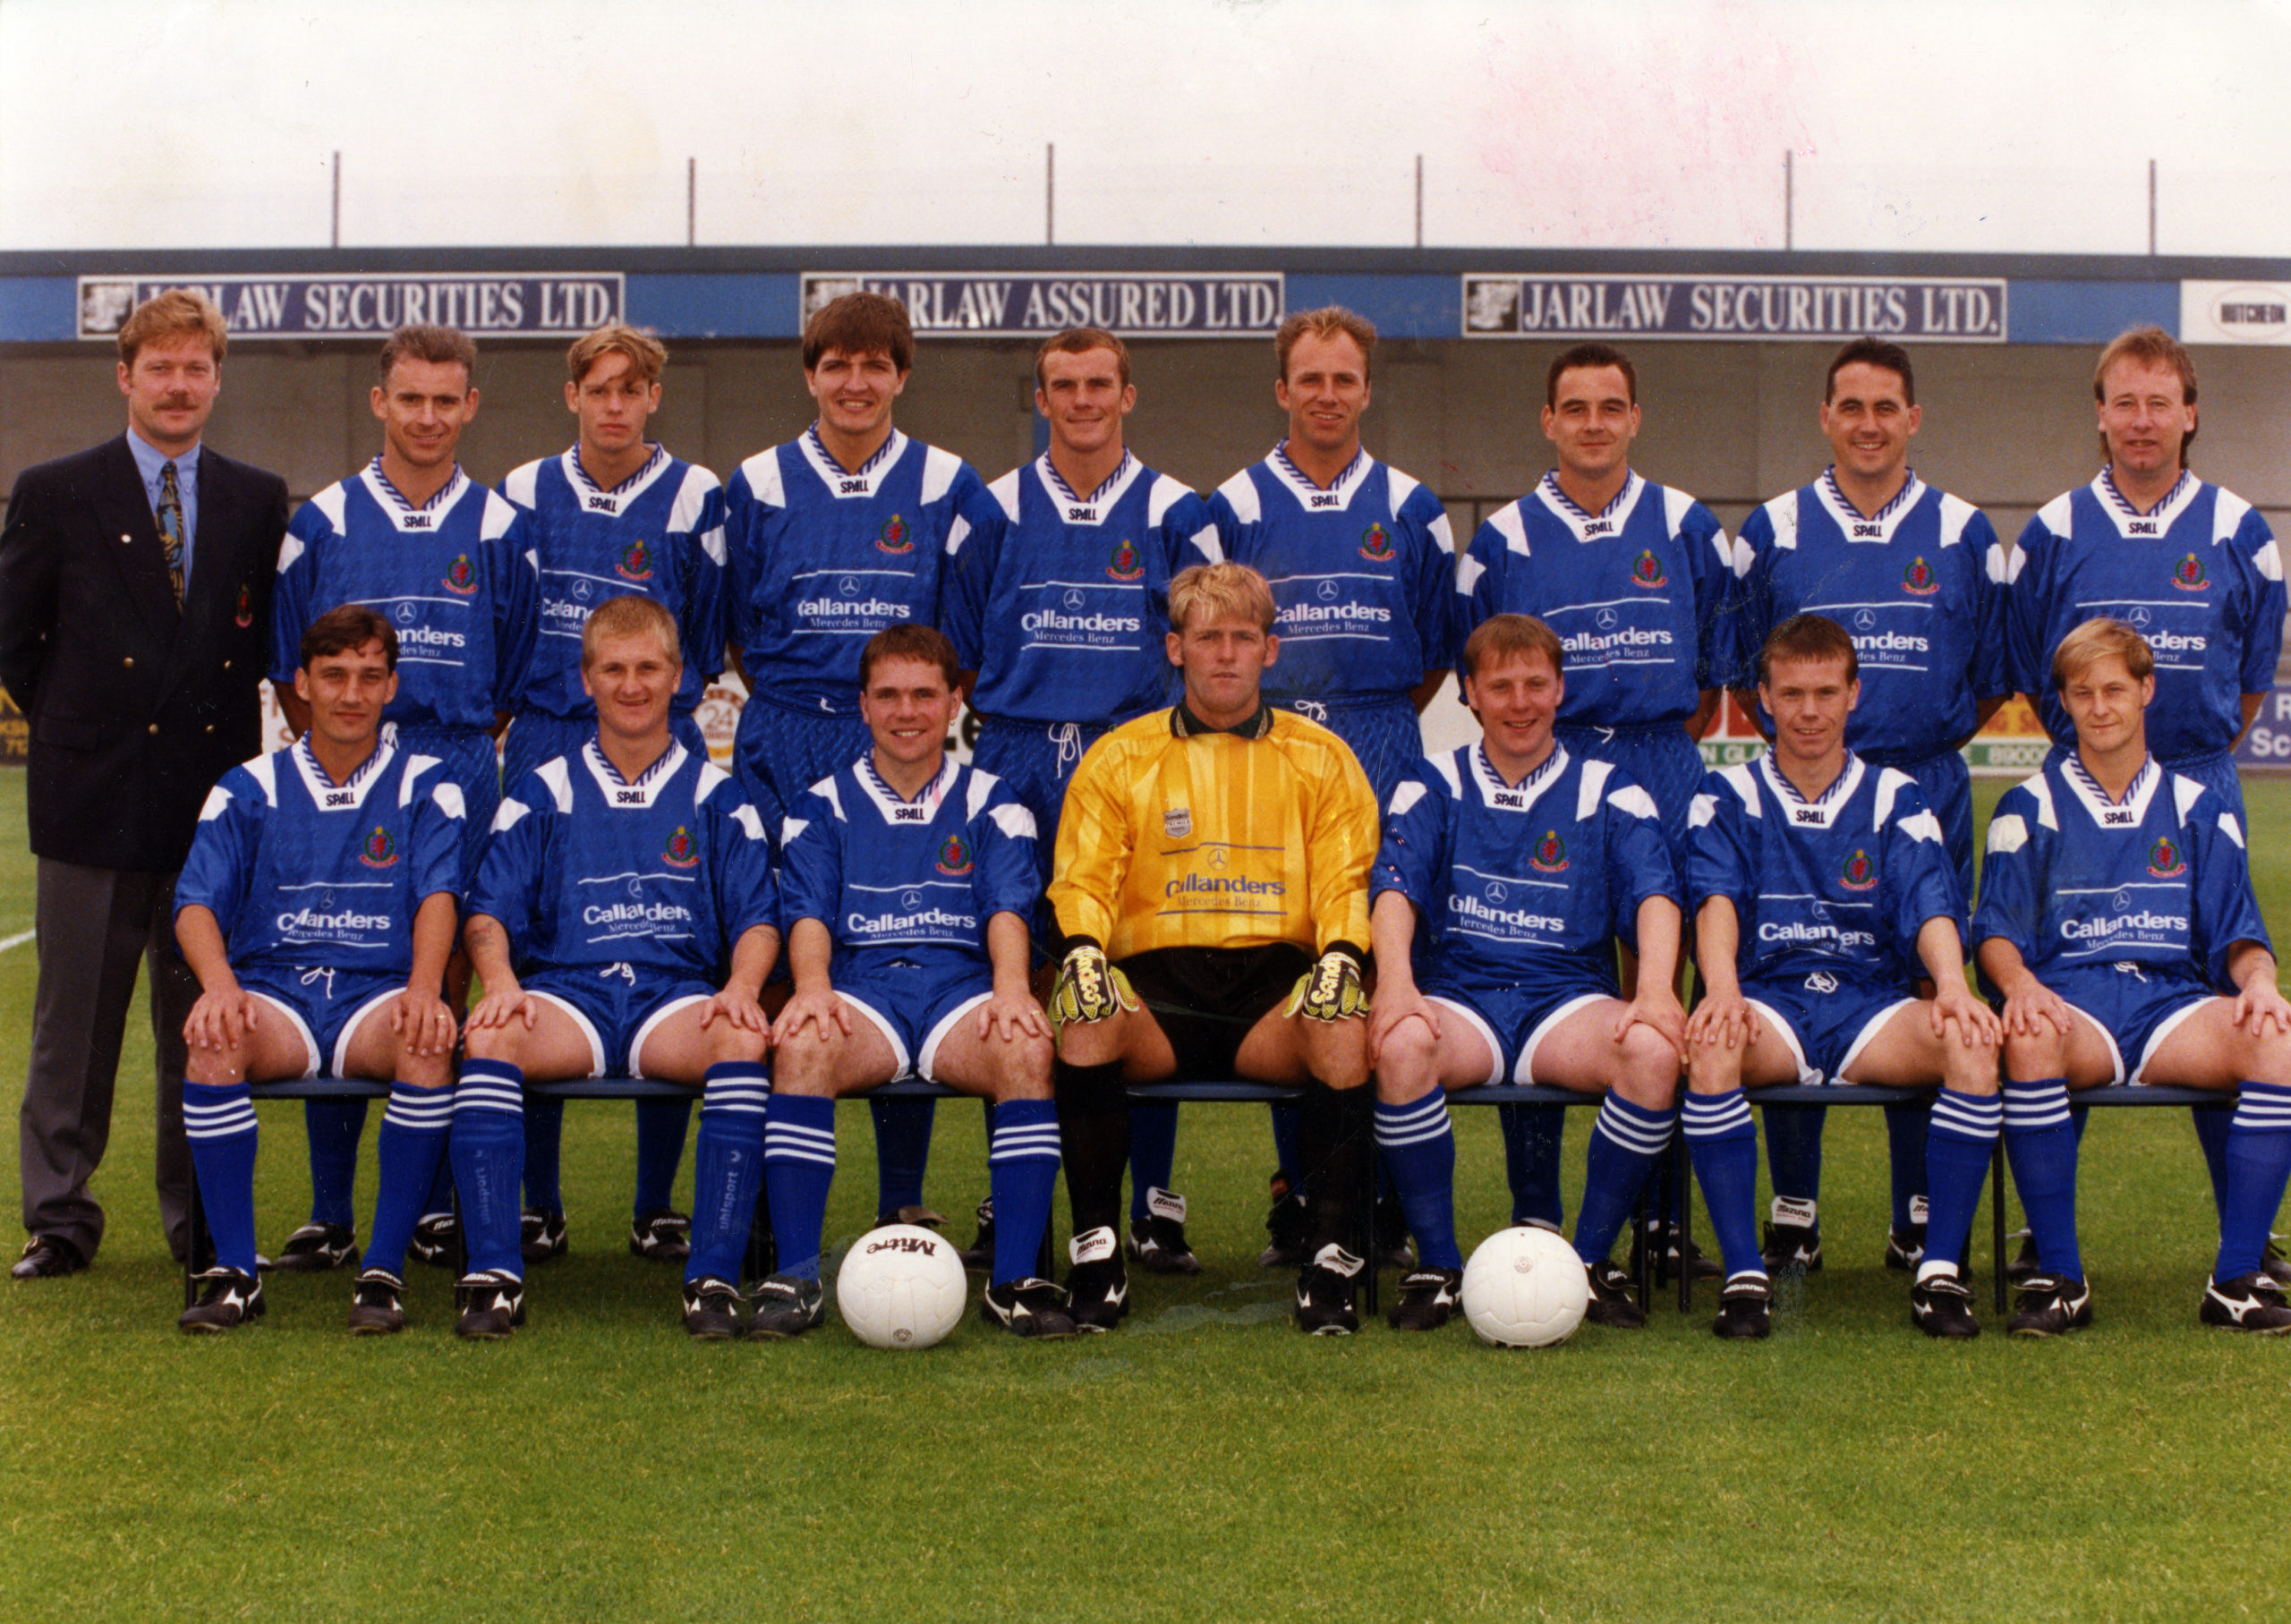 Cove Rangers 1994/95. Front (from left): Graeme Park, Dave Morland, Doug Baxter, Arch McLean, Alan Leslie, Michael Beattie, Tommy Forbes. Back: manager Kenny Taylor, Bruce Morrison, Ritchie Clark, Andy Paterson, Mark Murphy, David Caldwell, David Whyte, Ray Lorrimer and Ray Stephen.